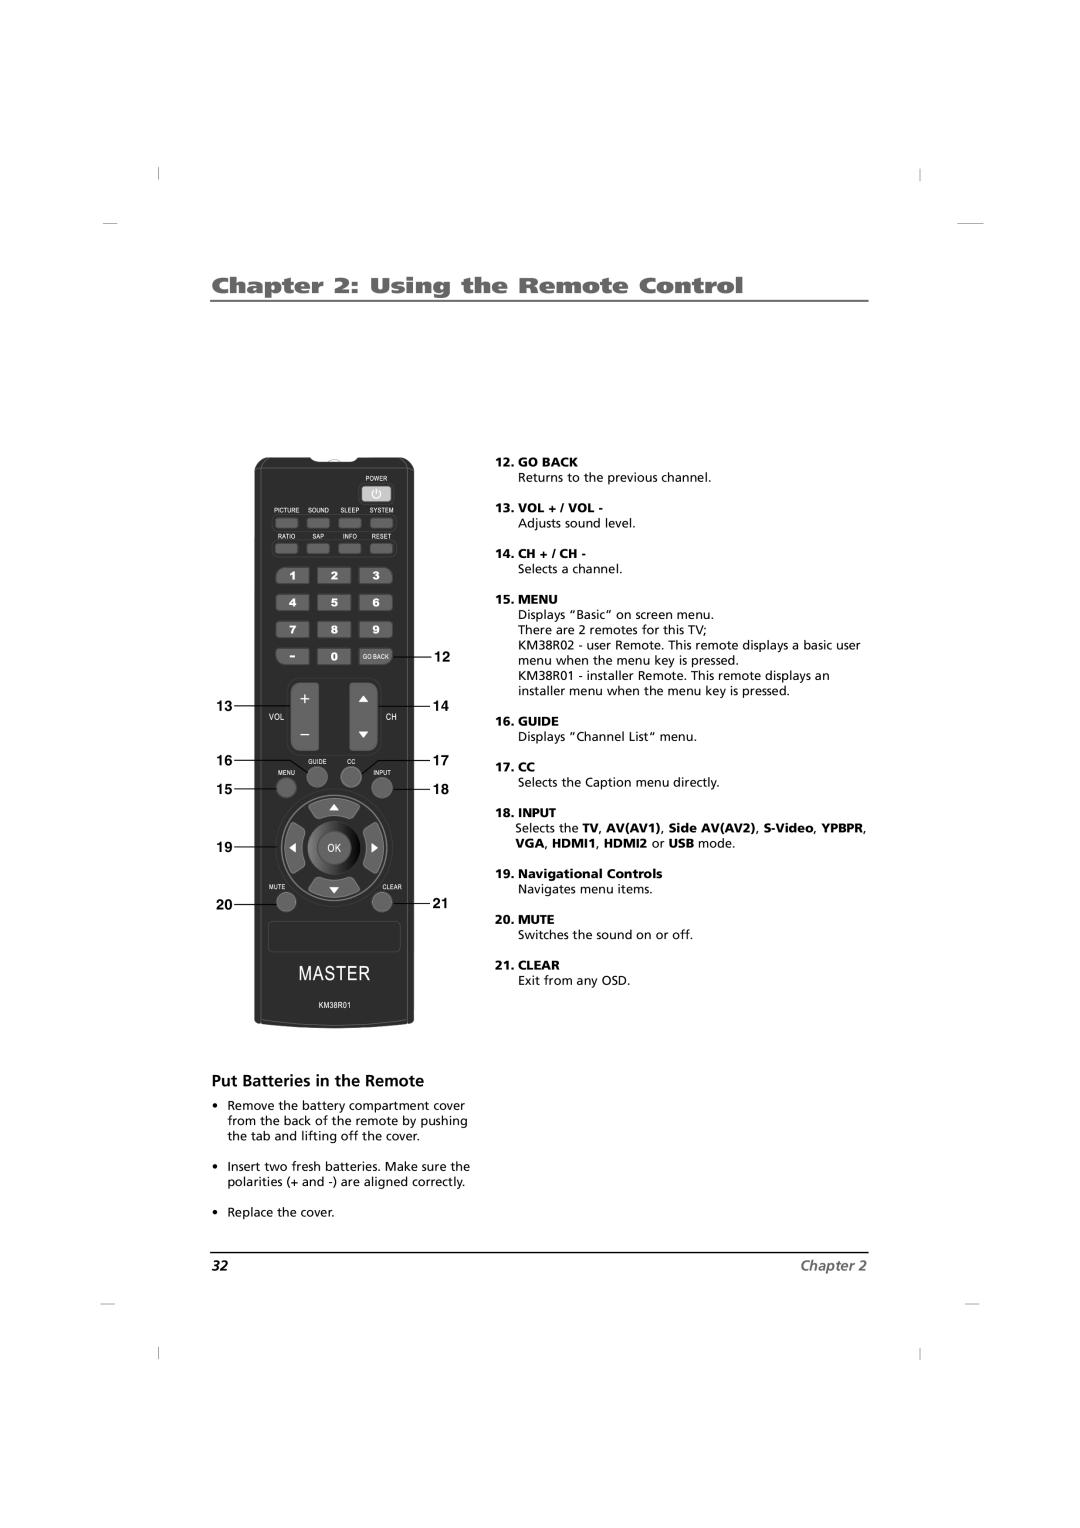 RCA J26CE820, J42CE820, J32CE720 manual Put Batteries in the Remote, Using the Remote Control, Chapter 